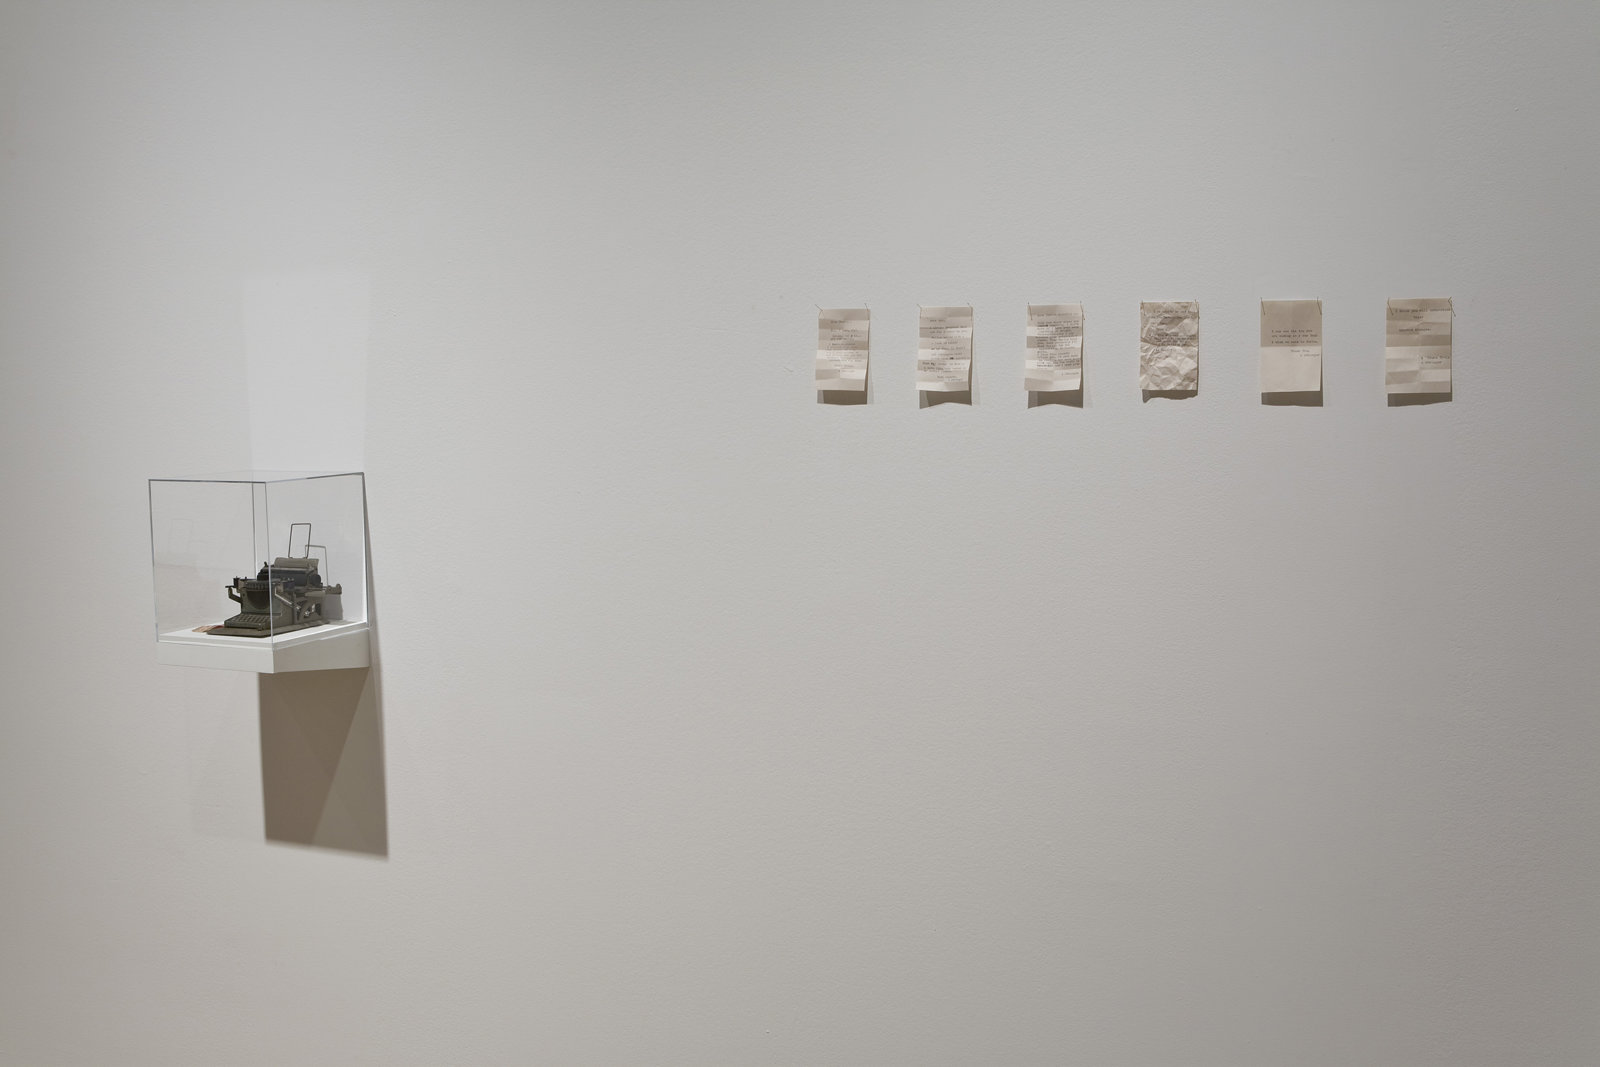 Geoffrey Farmer, Notes For Strangers, 1989–1990, small typewriter, 6 typewritten notes on paper, transfer ticket, shelf with plexiglass top, dimensions variable